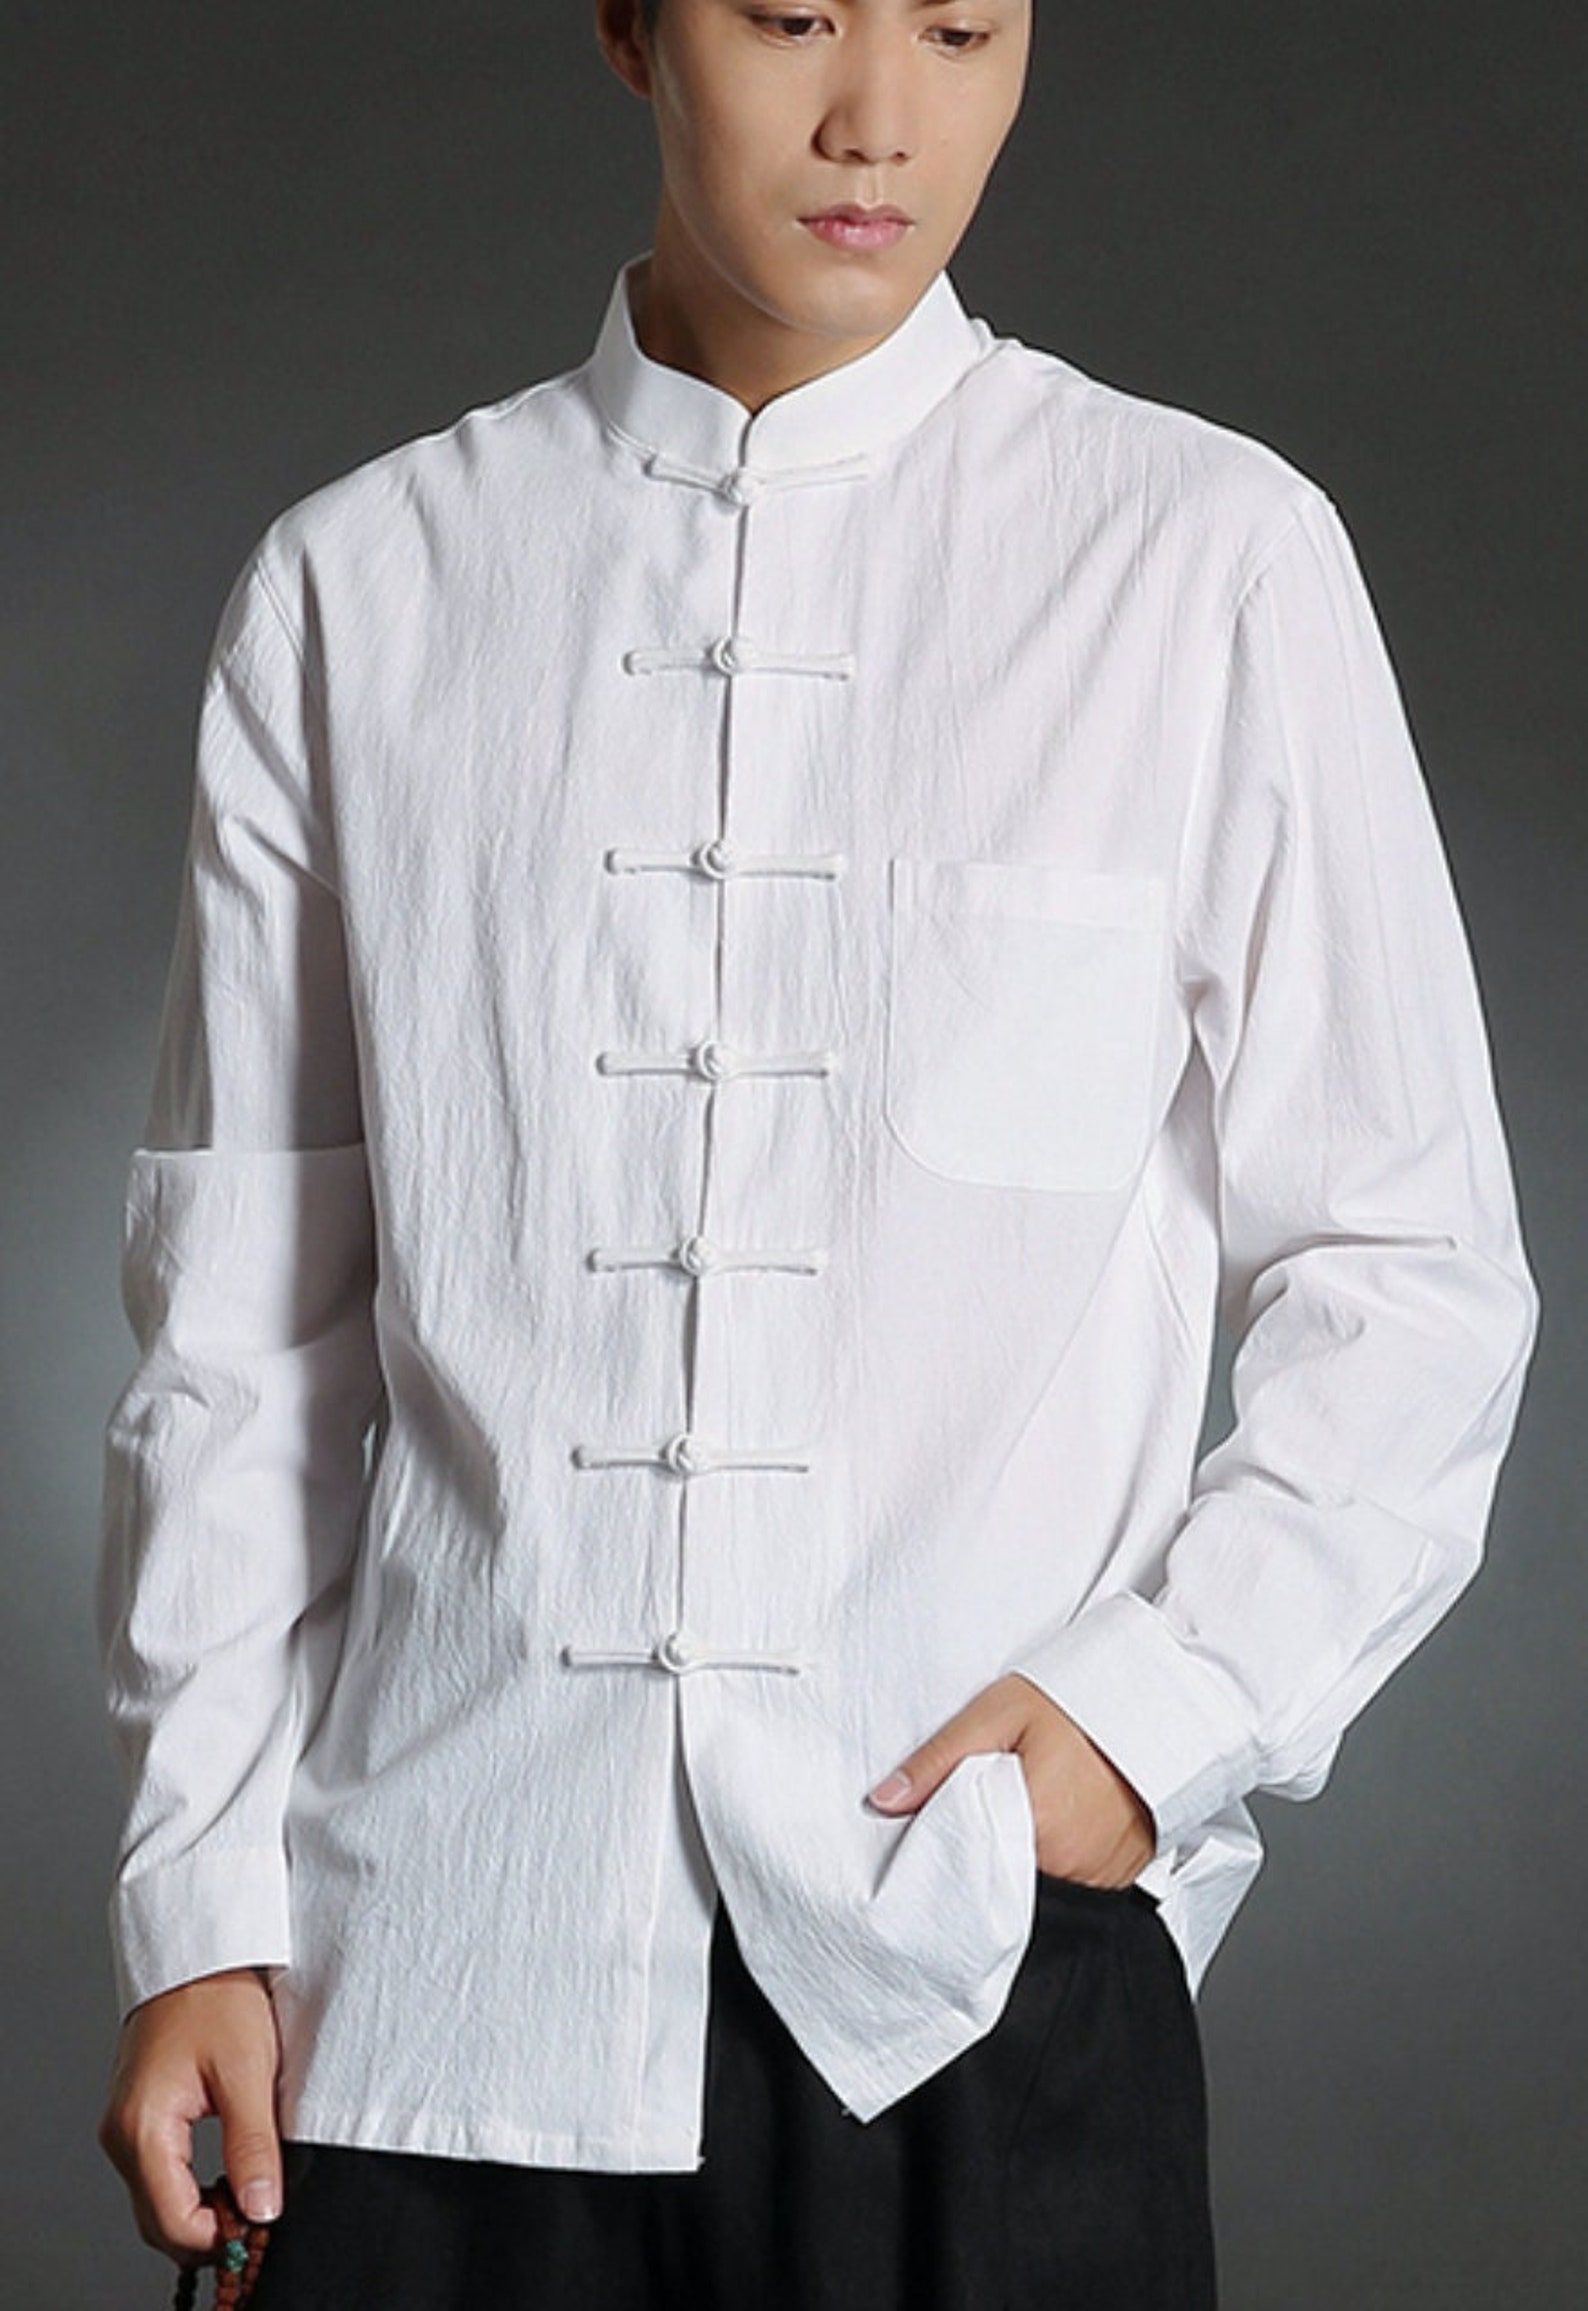 Men's Chinese Shirt / Frog Button / Lined / Mandarin - Etsy